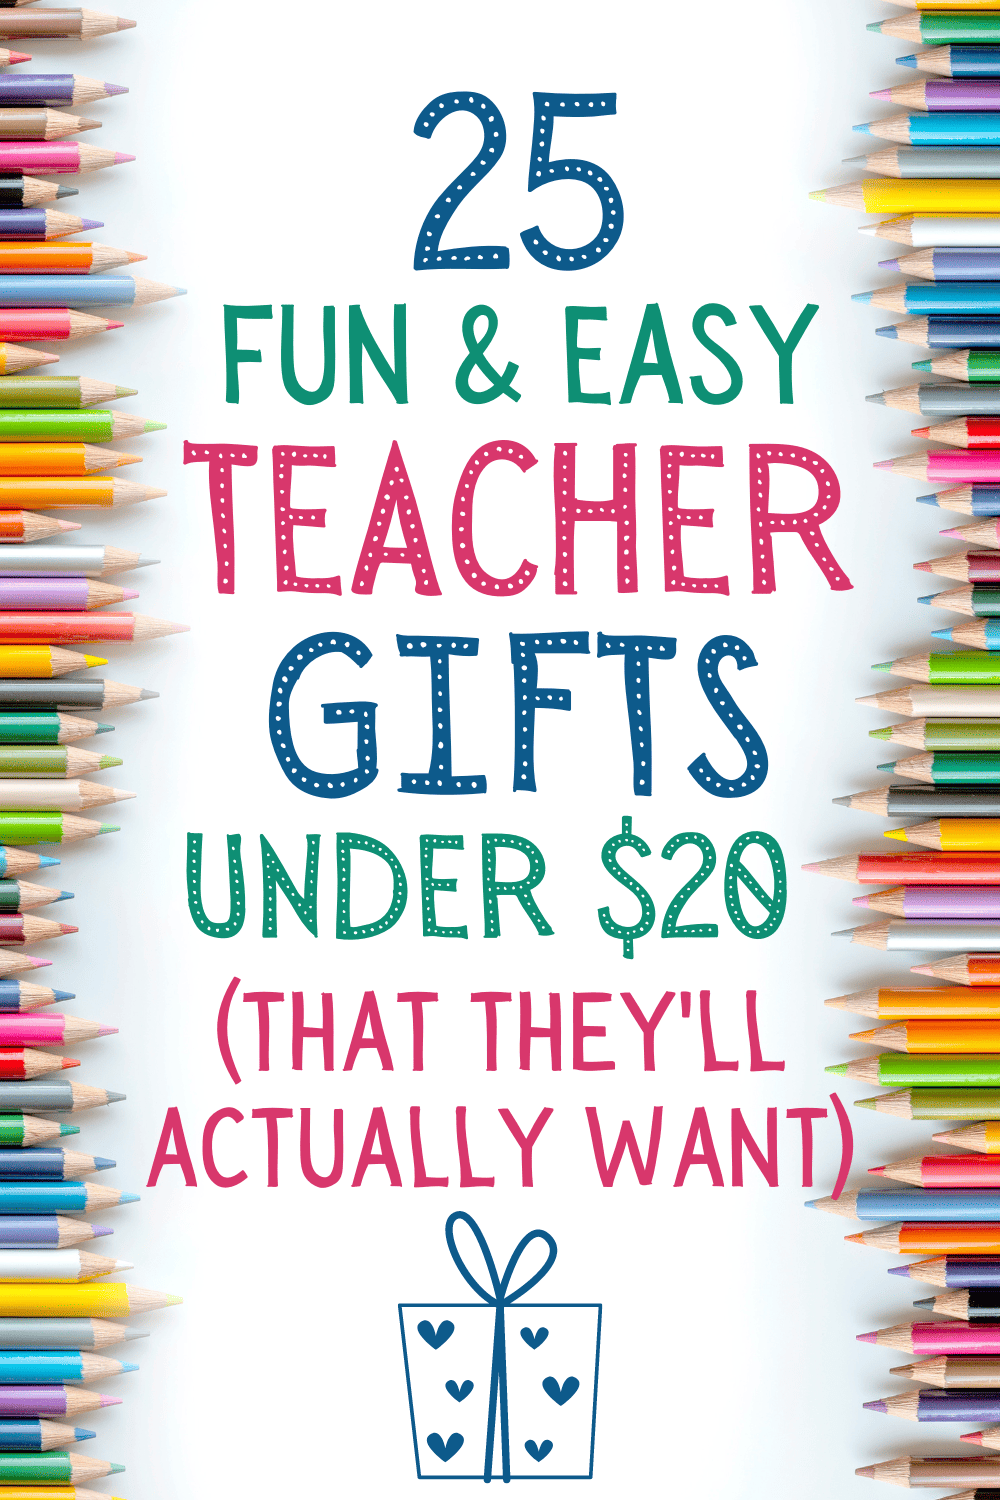 Small teacher gift ideas under ! These inexpensive teacher appreciation gift ideas are thoughtful and fun to give. Teacher christmas gift ideas inexpensive, small teacher gift ideas christmas, small teacher gifts beginning of year, end of the year teacher gift ideas cheap, small teacher appreciation gifts ideas, cute small teacher gifts, small gift ideas for teachers, small gift ideas for teacher appreciation, small teacher appreciation gifts free printables, cheap teacher appreciation gifts